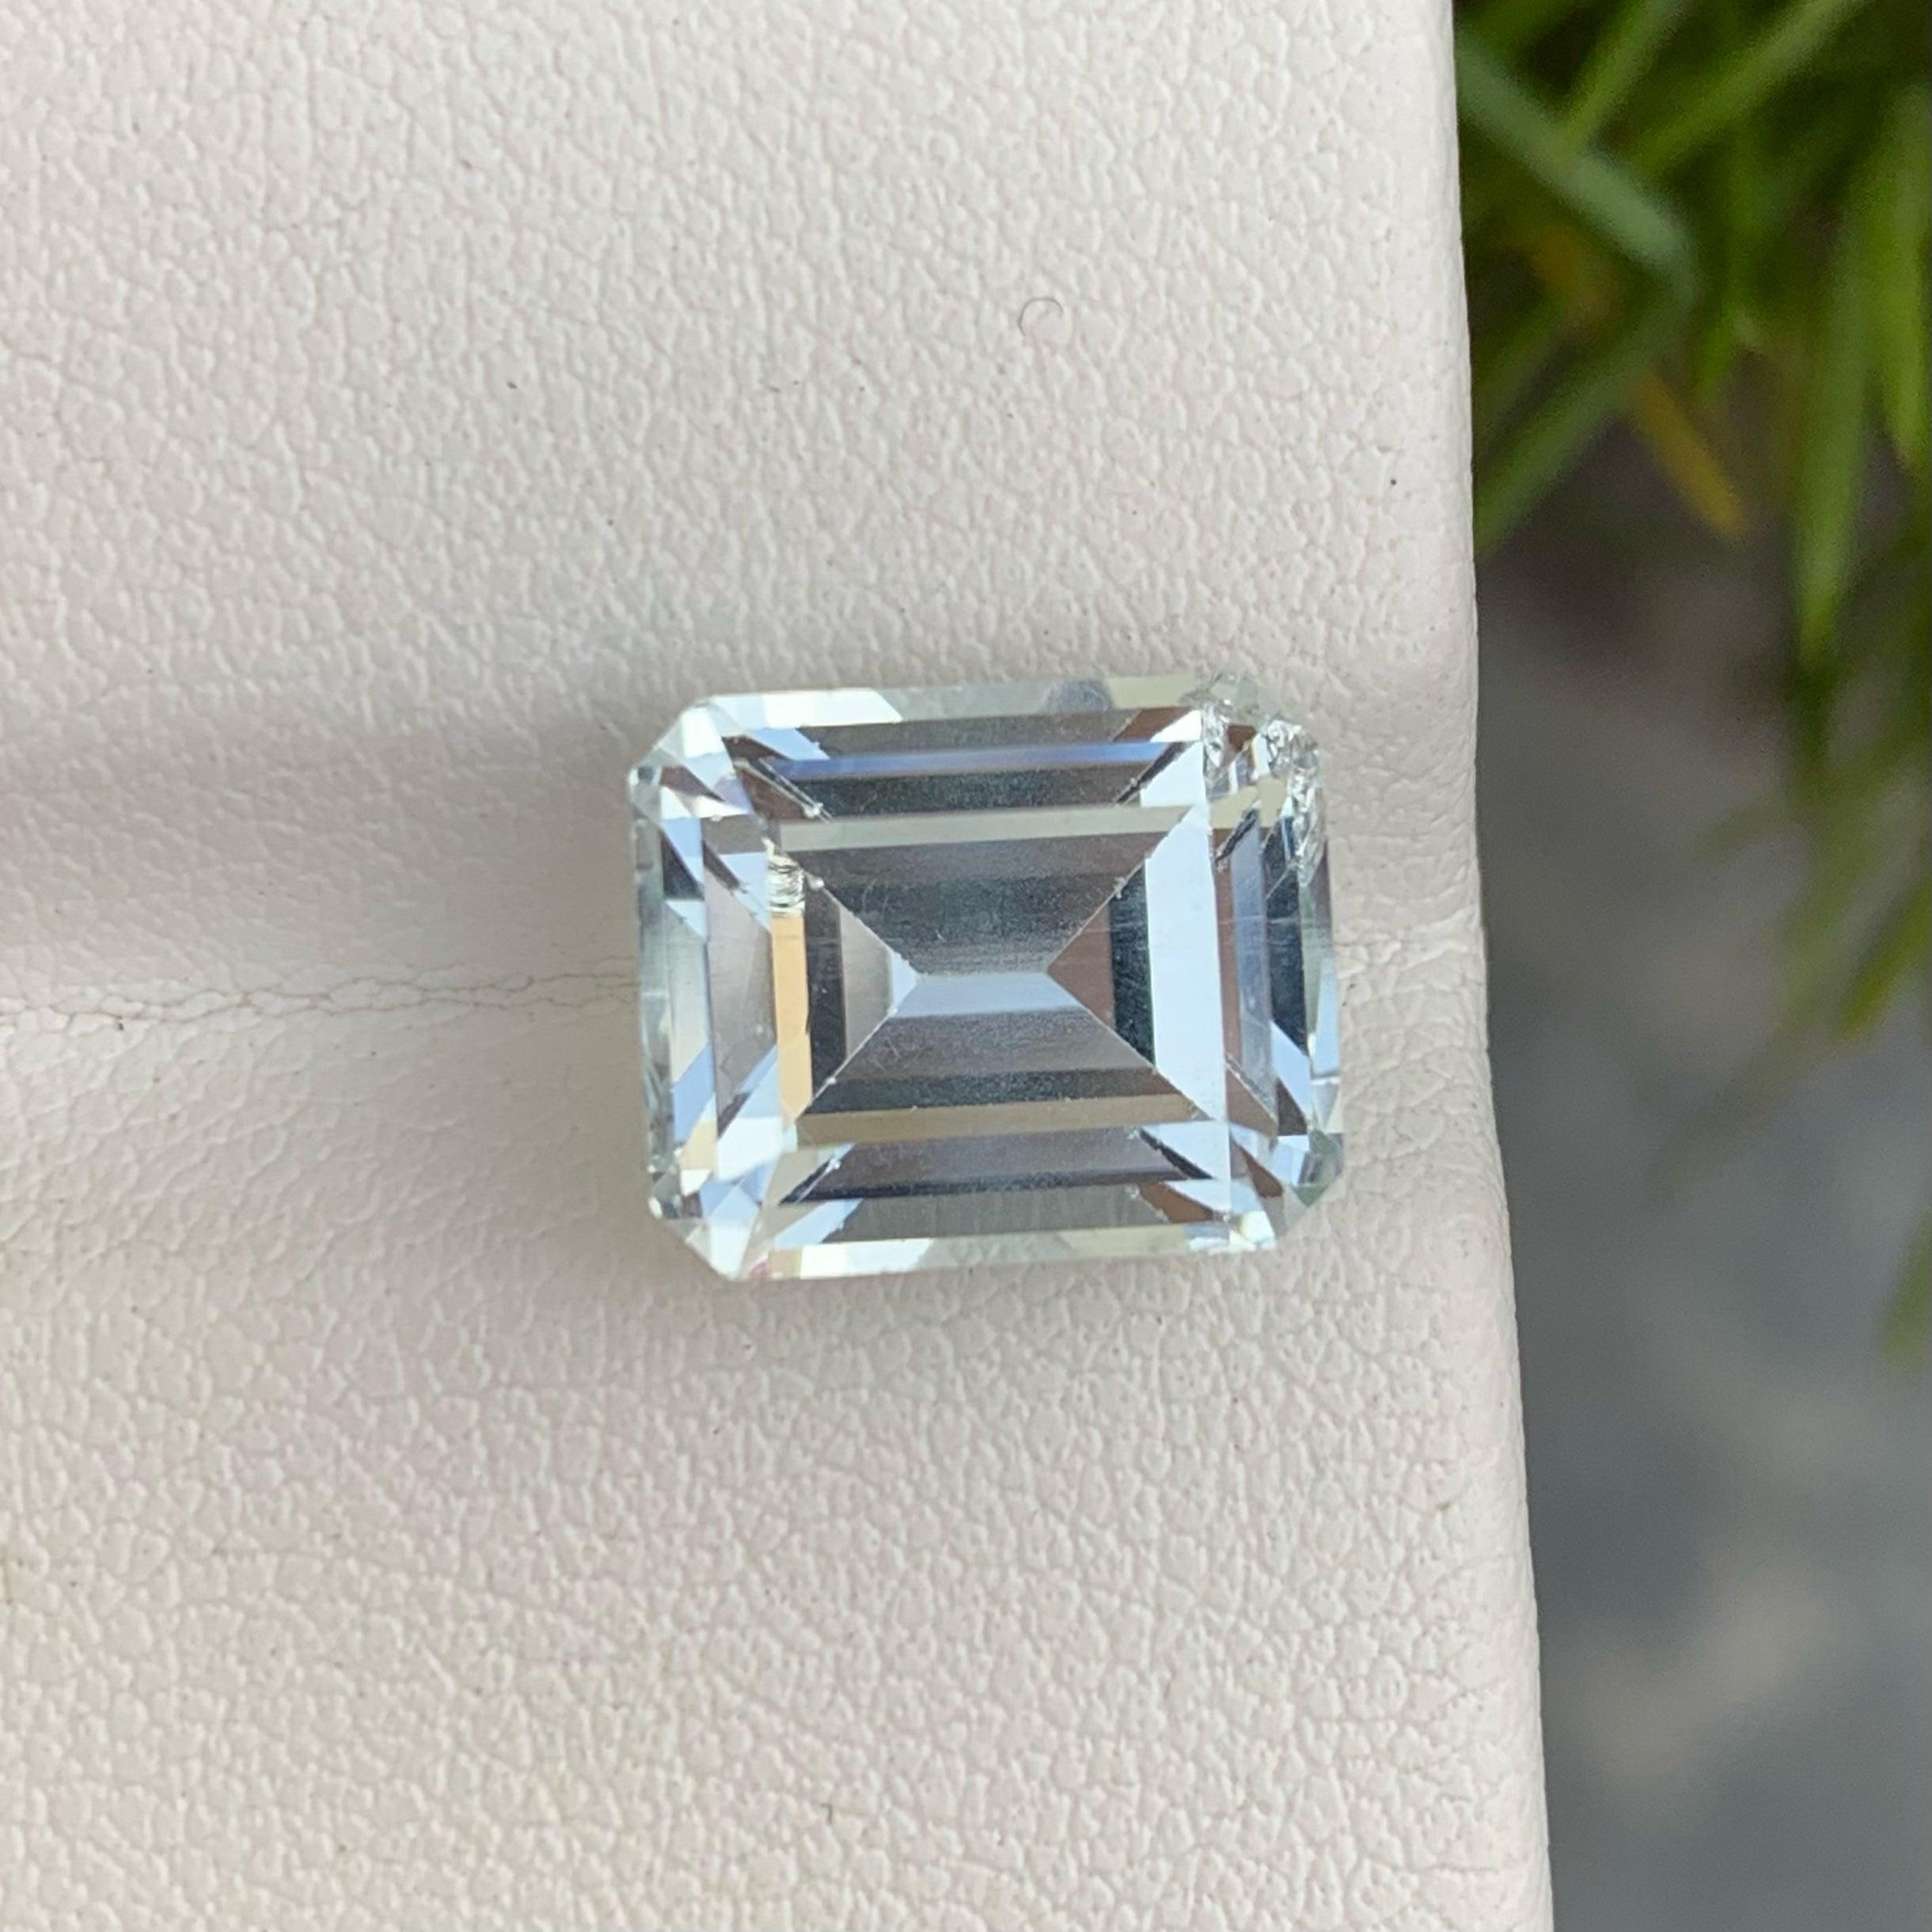 Incredible Natural Loose Aquamarine Gem, available for sale at wholesale price, natural high-quality, SI Clarity 6.40 carats certified aquamarine gemstone from Pakistan.

Natural Loose Aquamarine Gemstone Information:
GEMSTONE NAME: Incredible